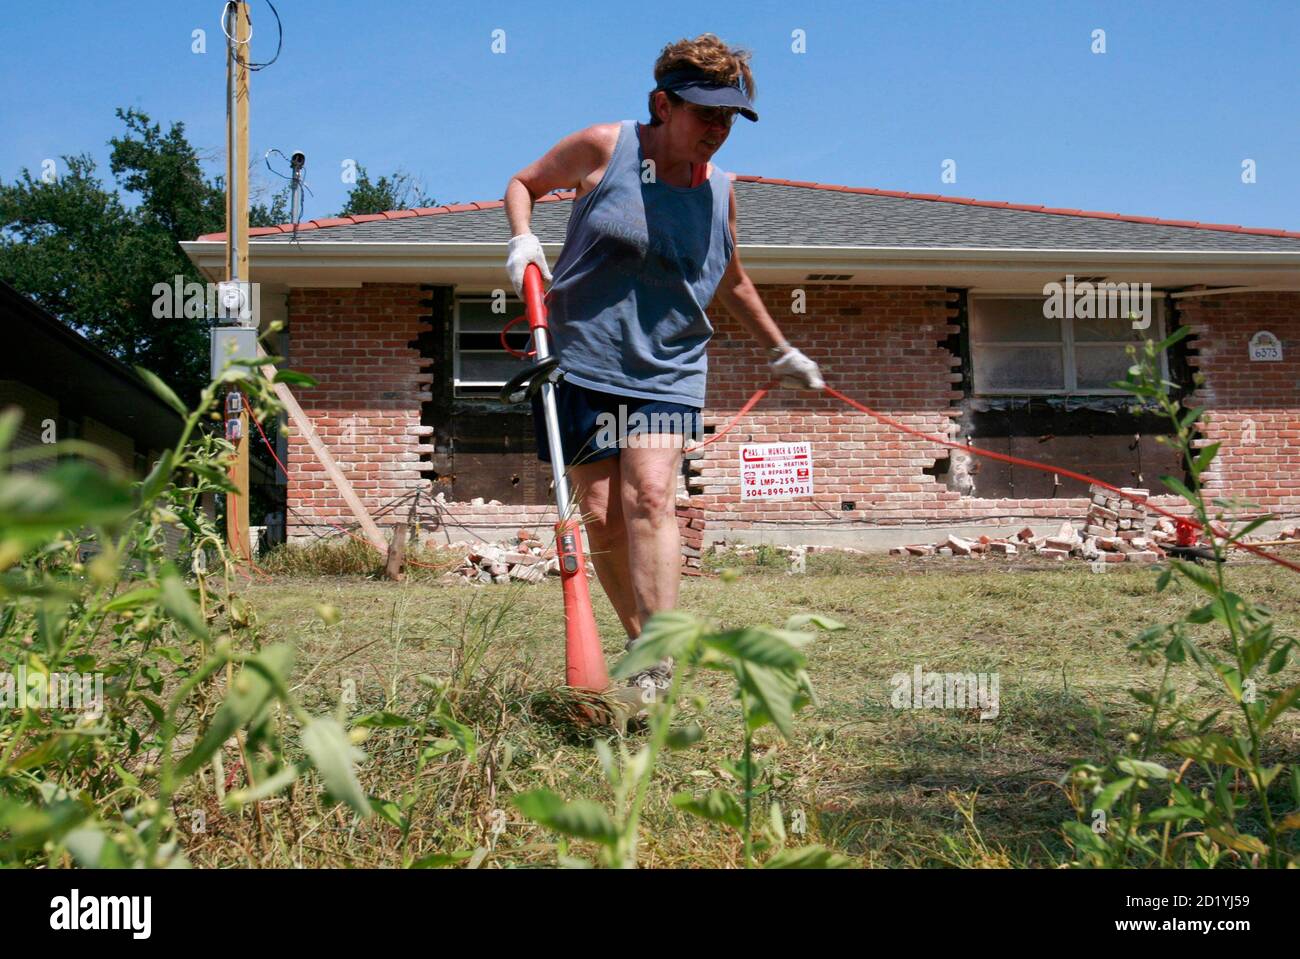 Kathy Singleton cuts weeds in front of her vacant house in the Lakeview area of New Orleans, Louisiana, August 25, 2007. New Orleans continues to recover from the damage incurred when Hurricane Katrina struck the city almost two years ago on August 29, 2005. REUTERS/Lee Celano (UNITED STATES) Stock Photo